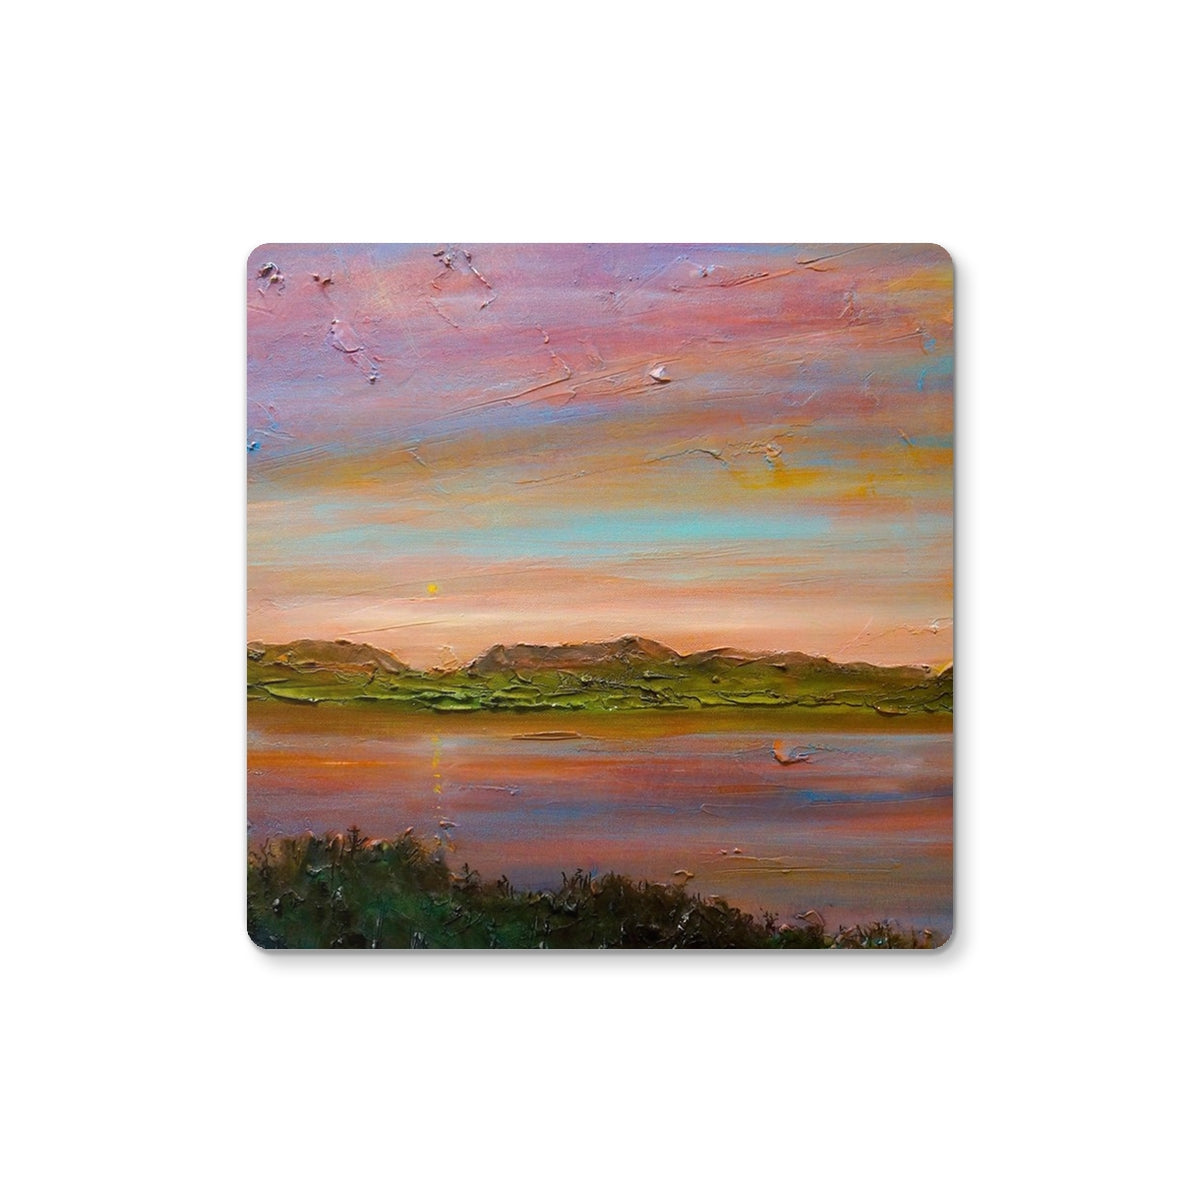 Gourock Golf Club Sunset Art Gifts Coaster-Homeware-River Clyde Art Gallery-2 Coasters-Paintings, Prints, Homeware, Art Gifts From Scotland By Scottish Artist Kevin Hunter